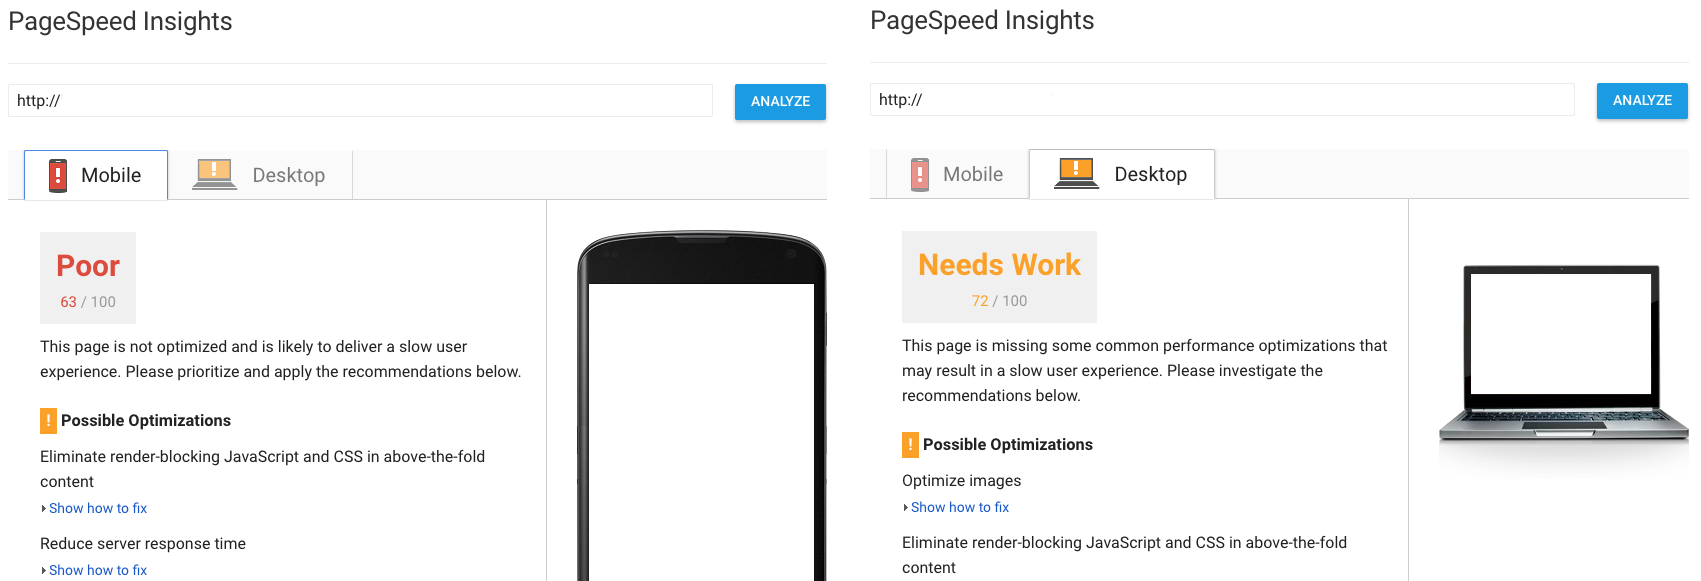 PageSpeed Insights Mobile & Desktop Results